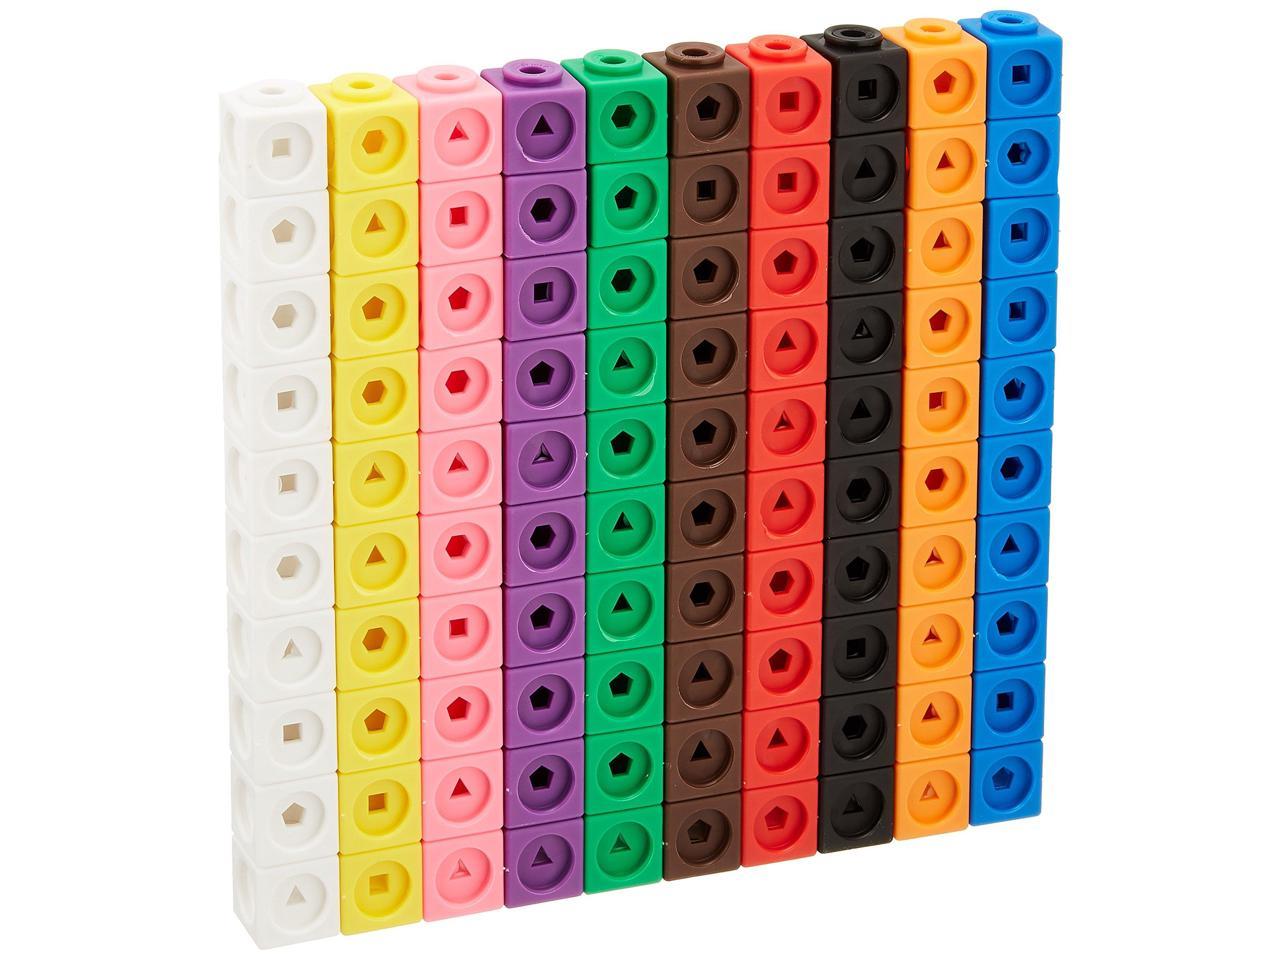 Preschool Math Link Cubes  Early Recognition Skills Set of 100 